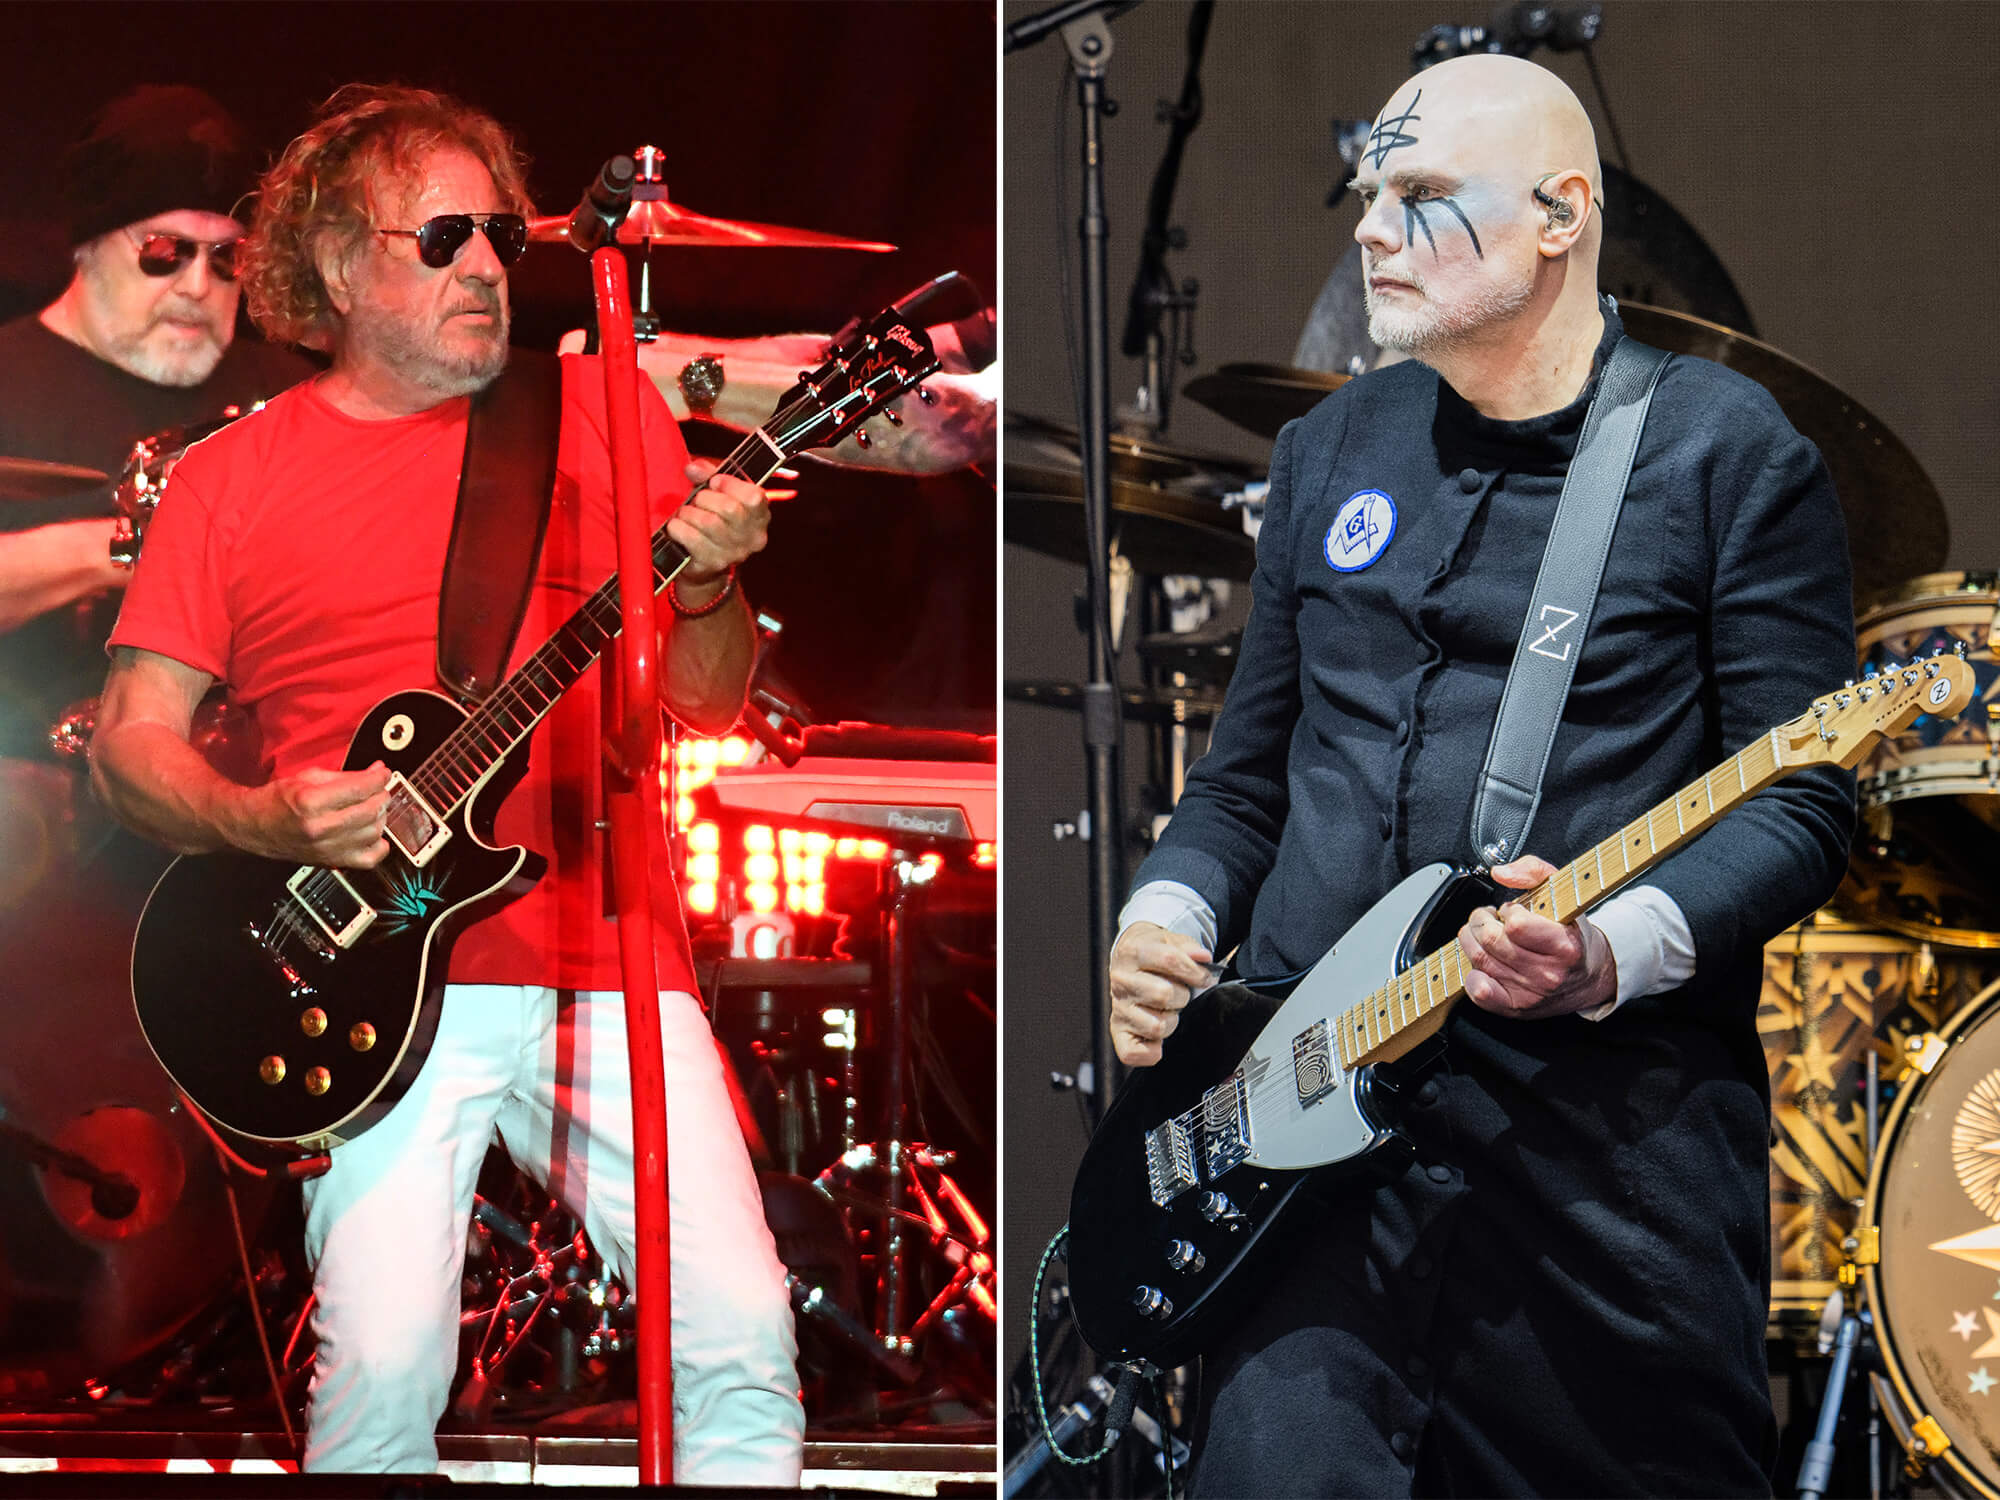 Sammy Hagar playing guitar and wearing sunglasses on stage (left). Billy Corgan wearing face paint and playing guitar on stage (right).